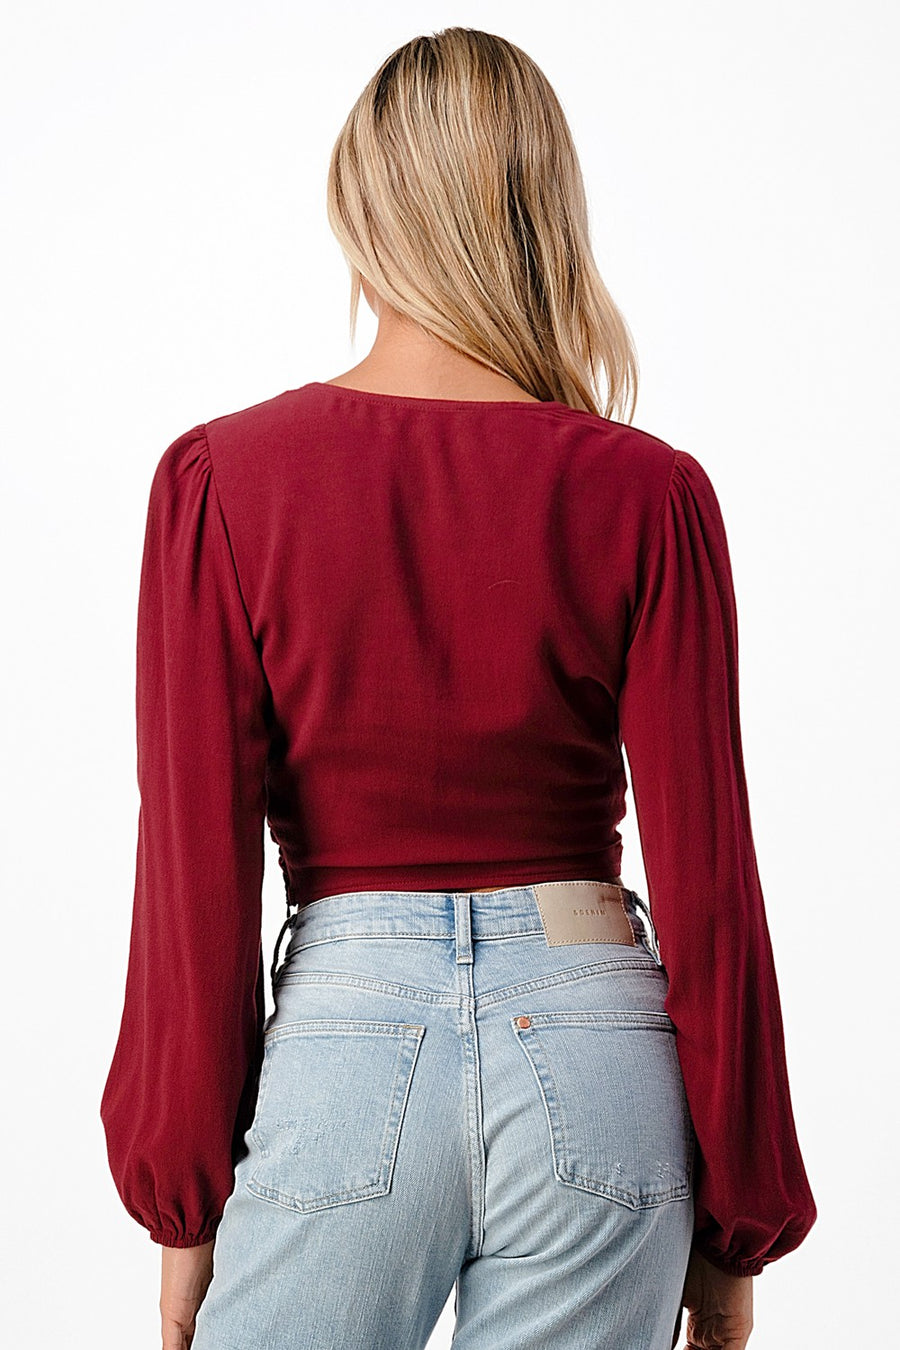 Ruched Long Sleeve Crop Top